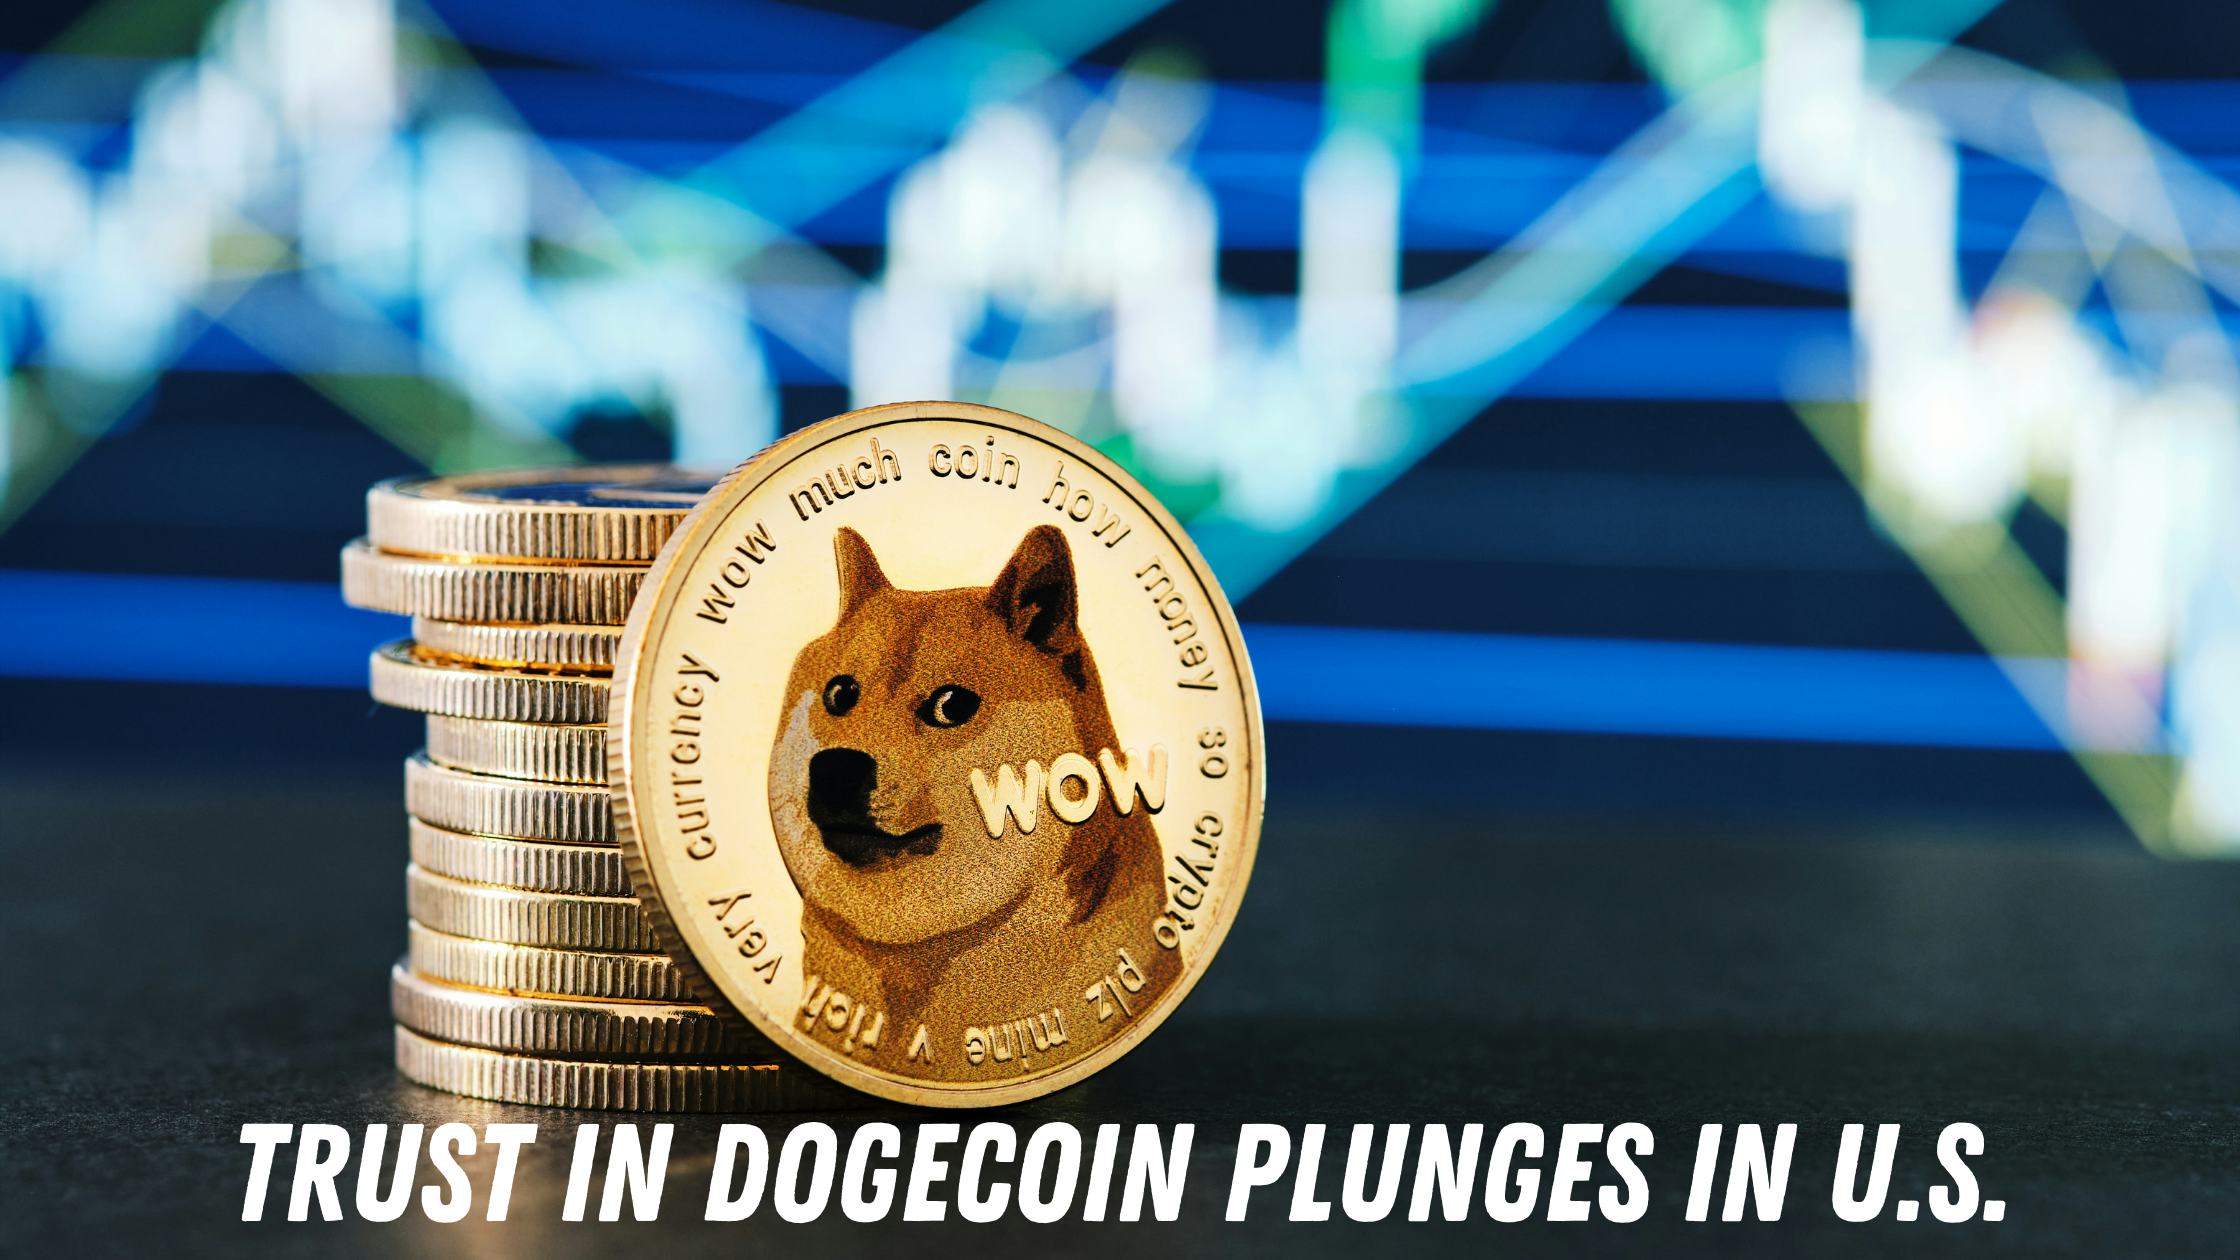 Trust in Dogecoin Plunges in U.S. (but There's Silver Lining)